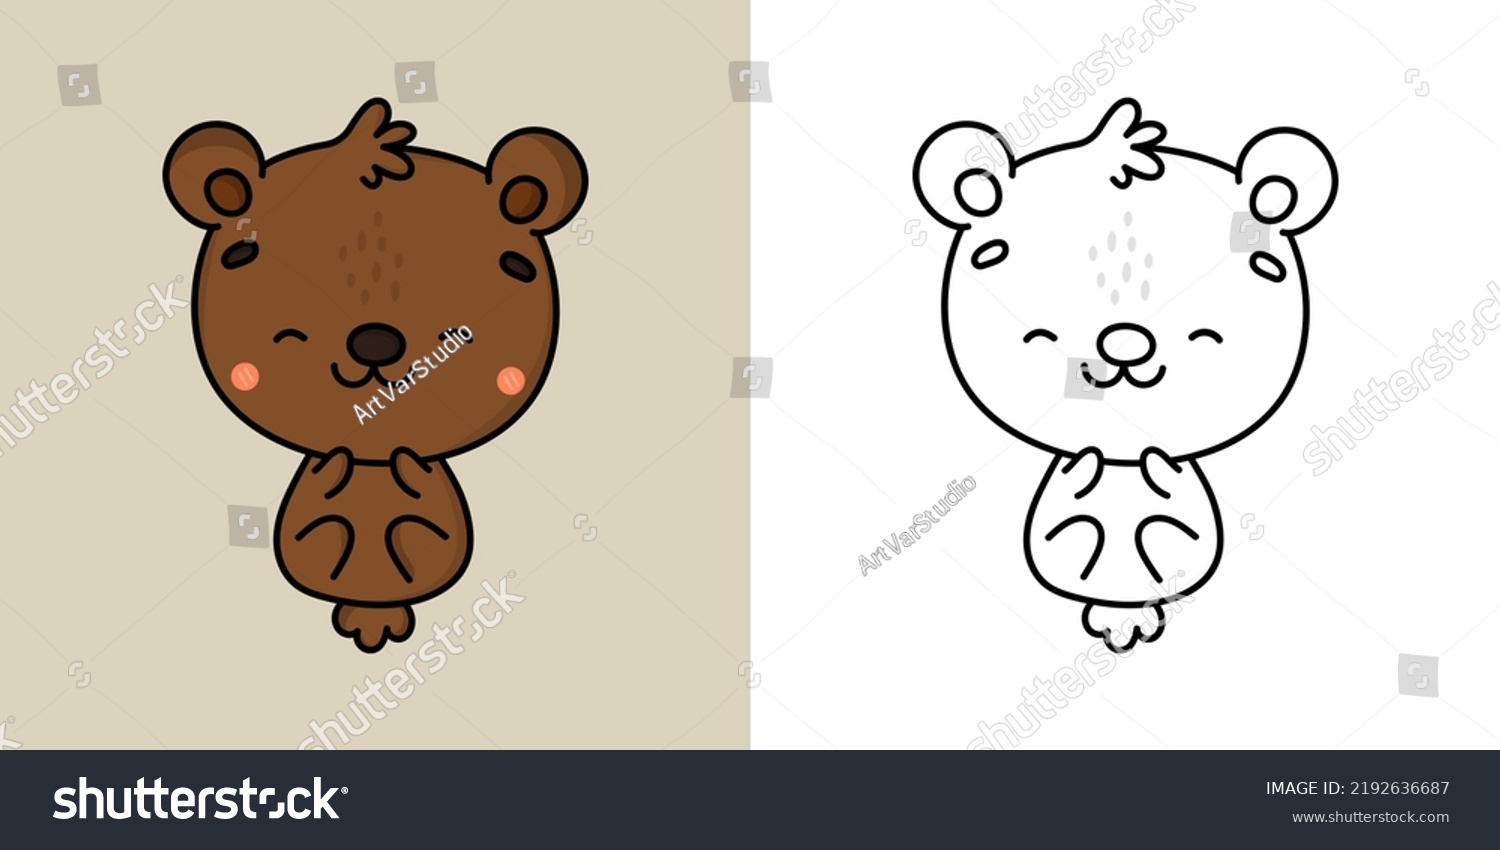 SVG of Kawaii Bear Clipart Multicolored and Black and White. Cute Kawaii Brown Bear. Vector Illustration of a Kawaii Animal for Stickers, Prints for Clothes, Baby Shower, Coloring Pages.
 svg